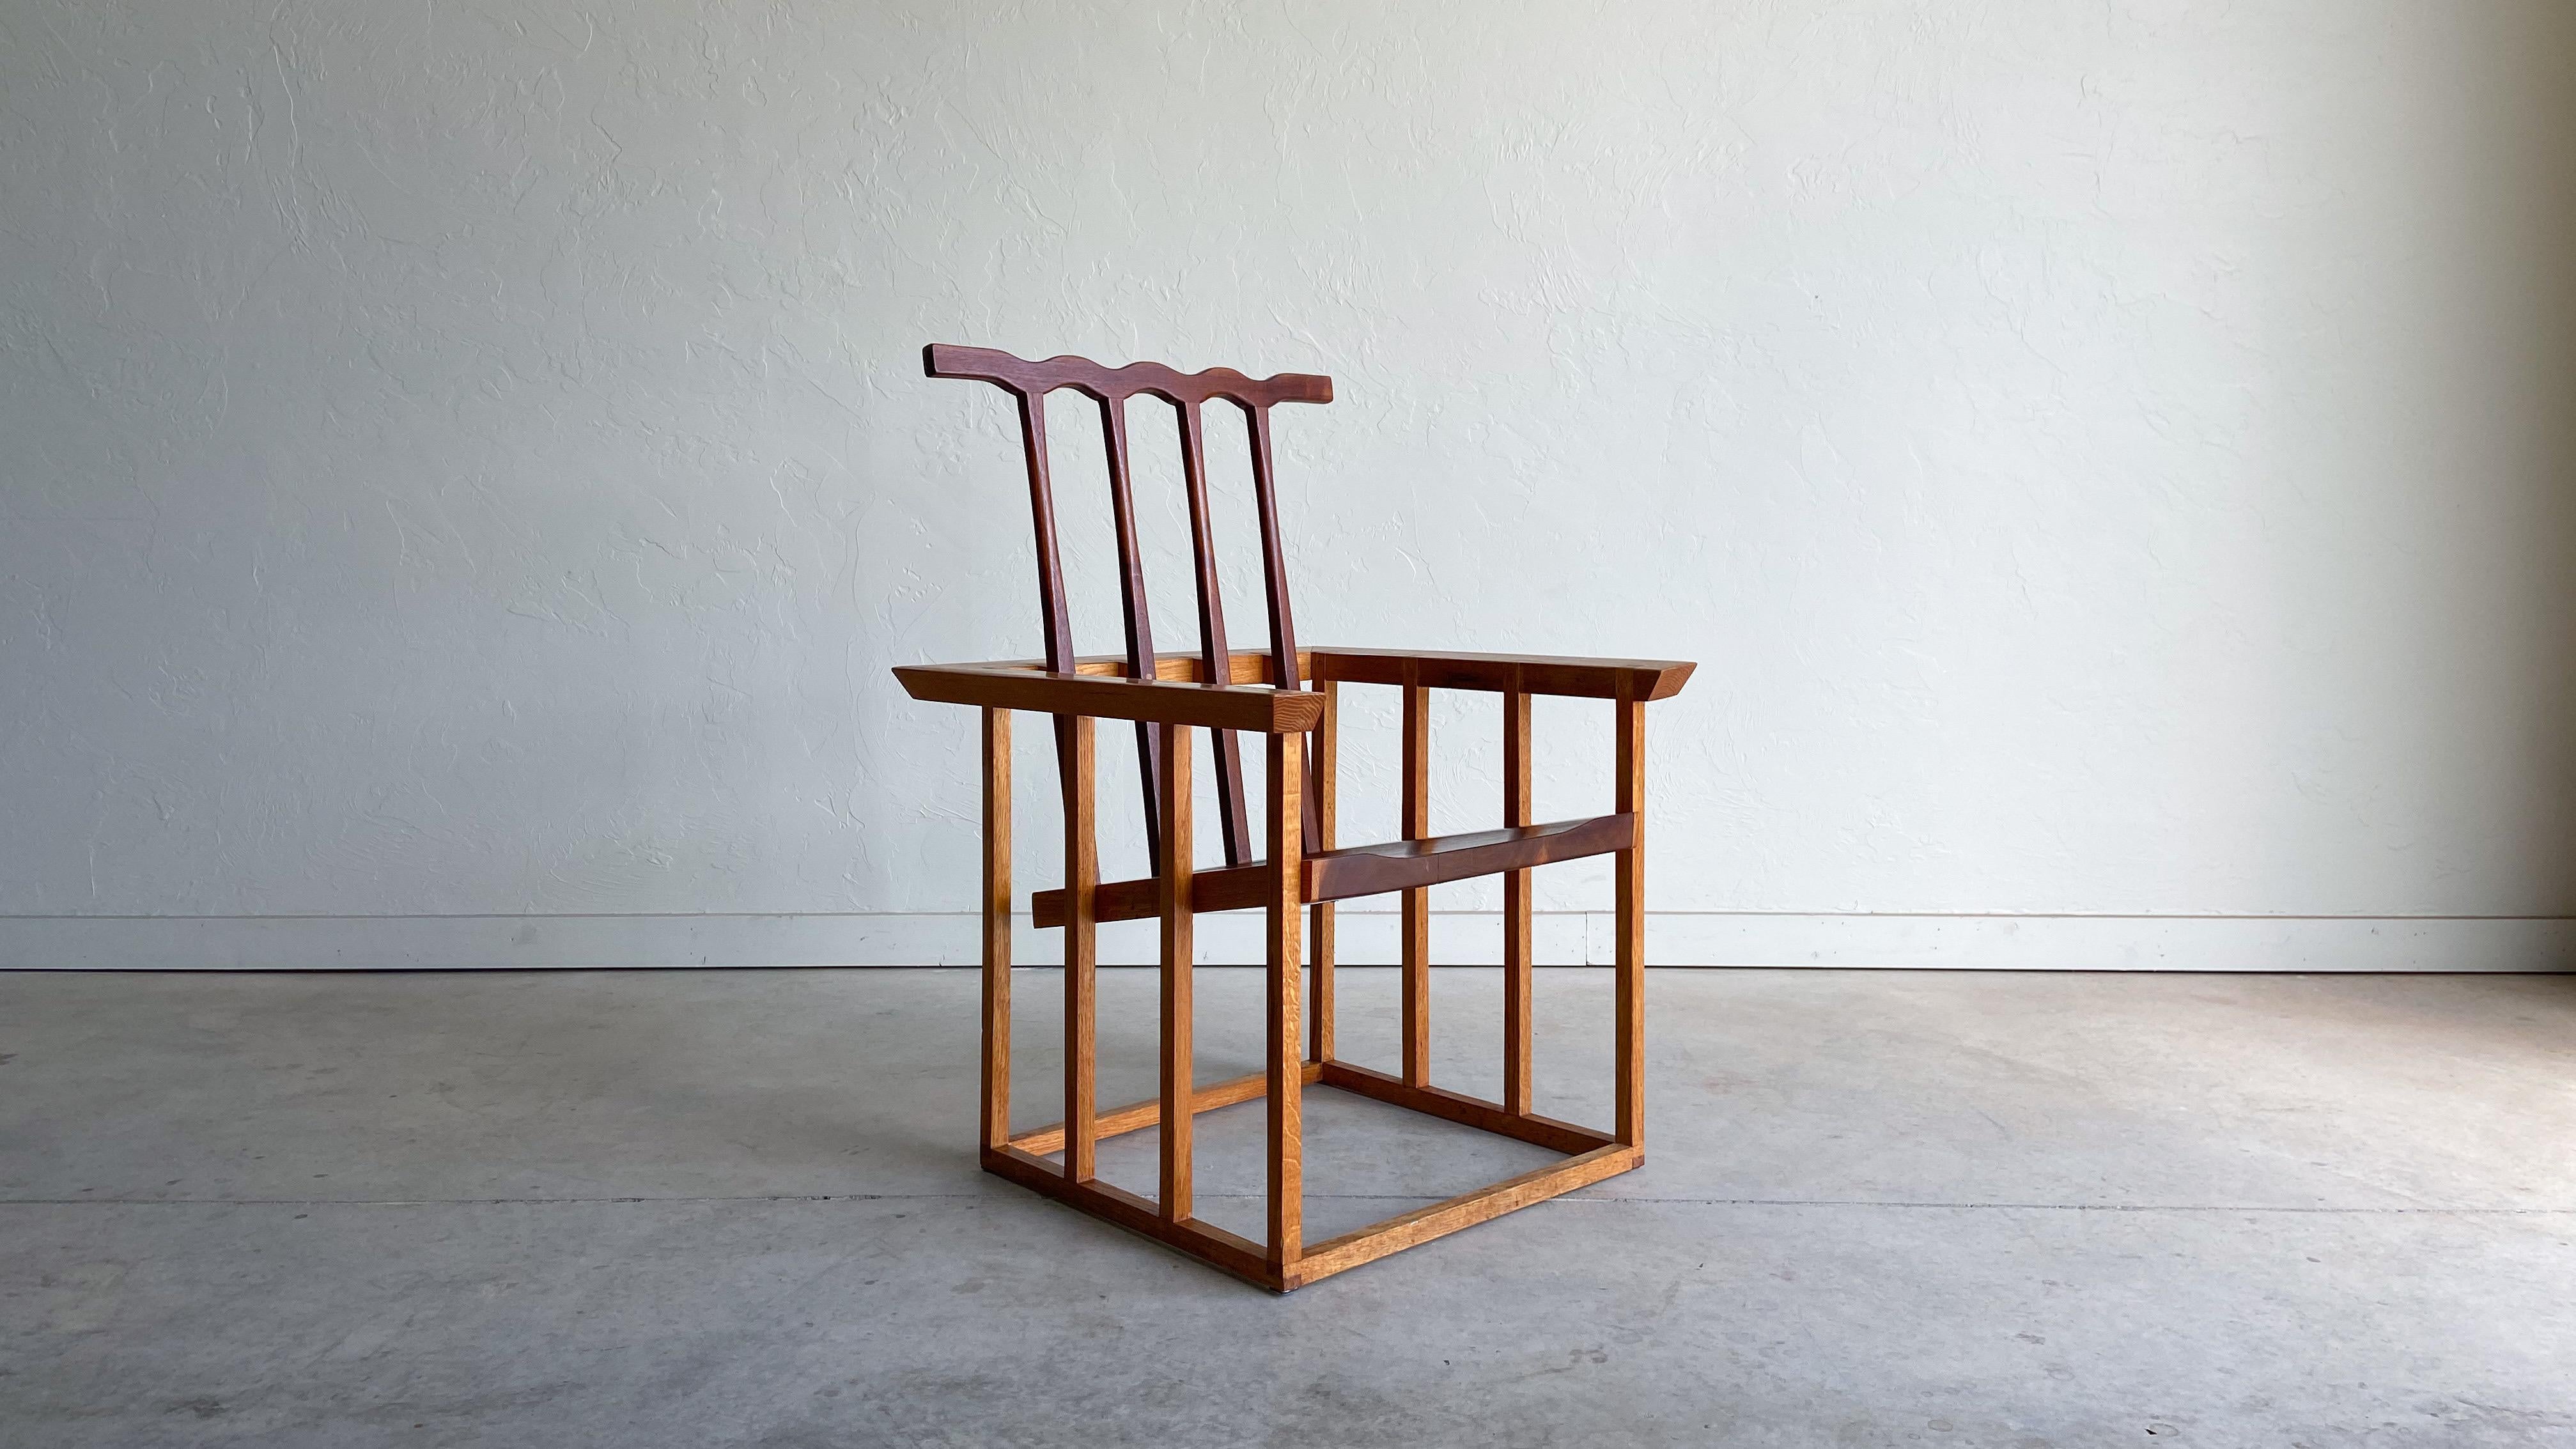 Offered is a well executed studio craft high back armchair made from solid oak and walnut. Constructed without hardware, using only dowel and lap joinery. 

A unique chair that is mostly geometric in design, but complimented by an almost whimsical